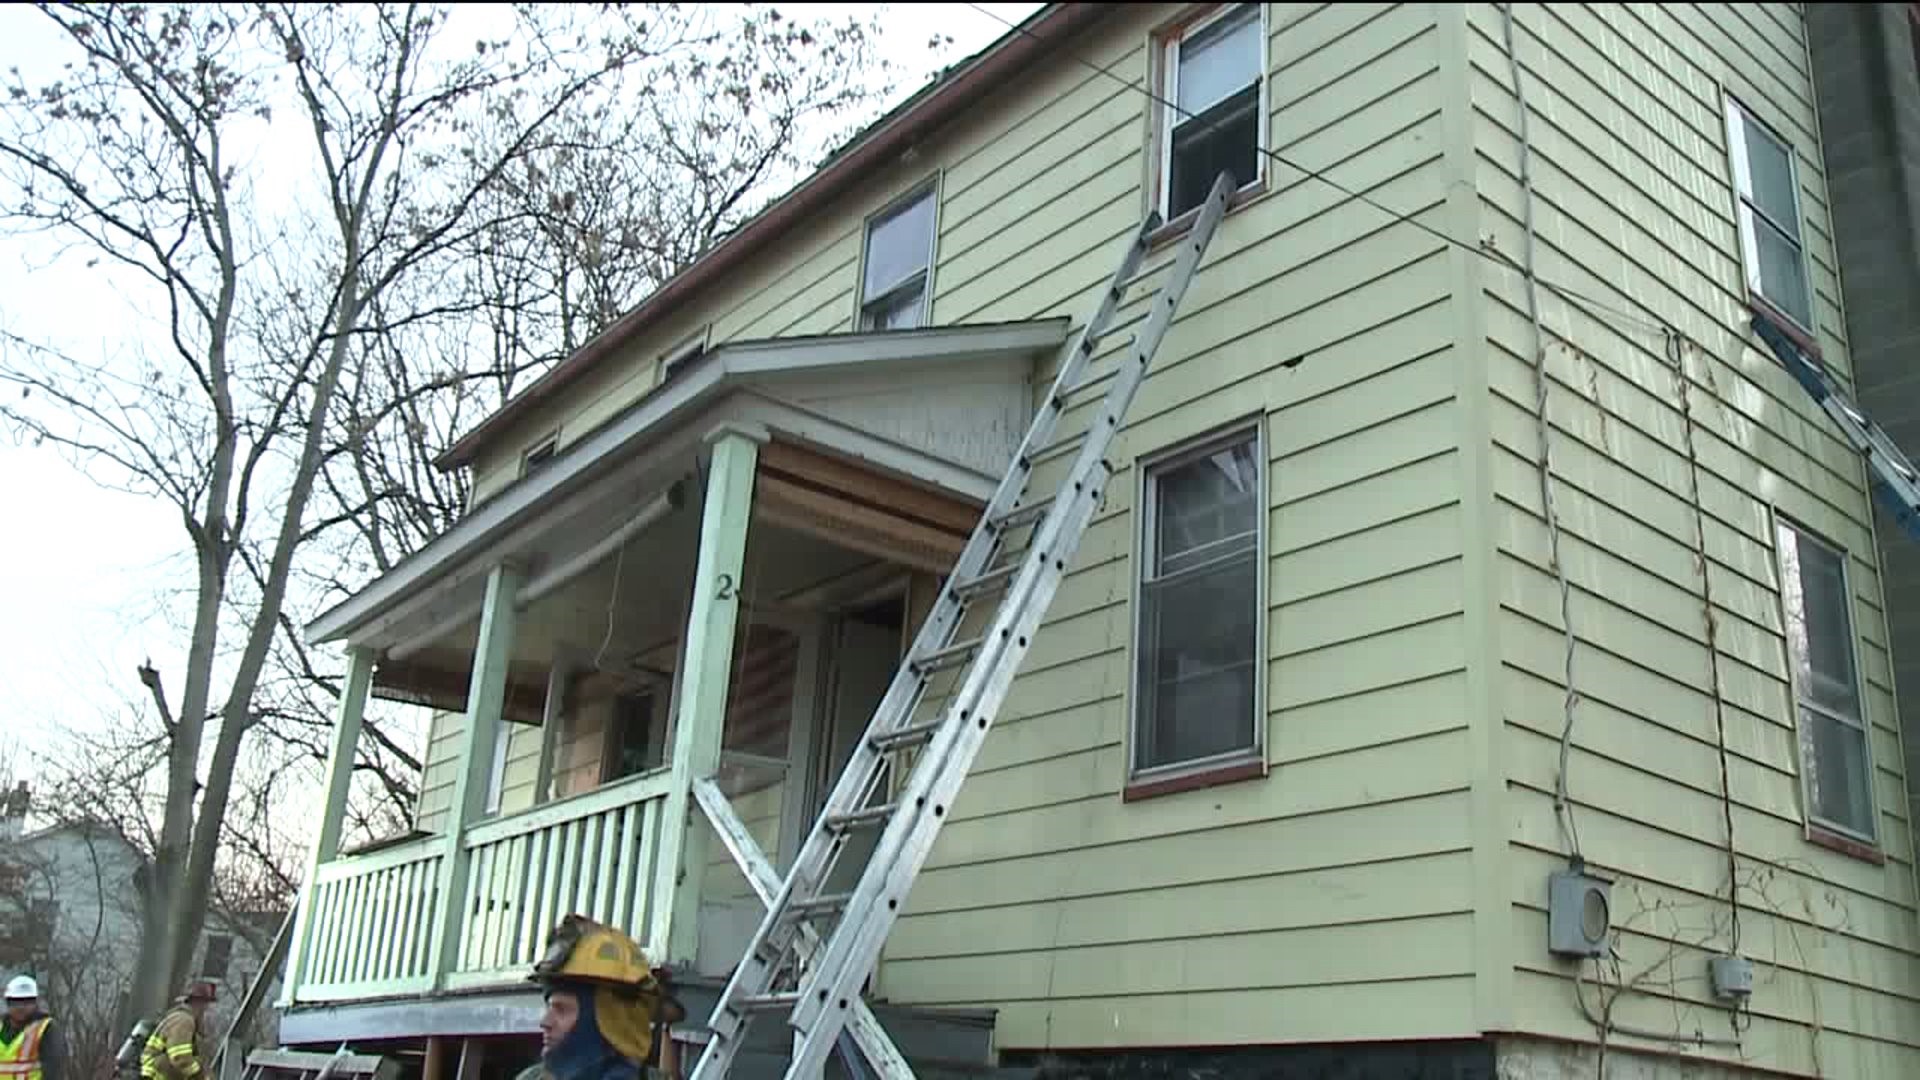 Officials Investigate Cause of Fire in Wilkes-Barre